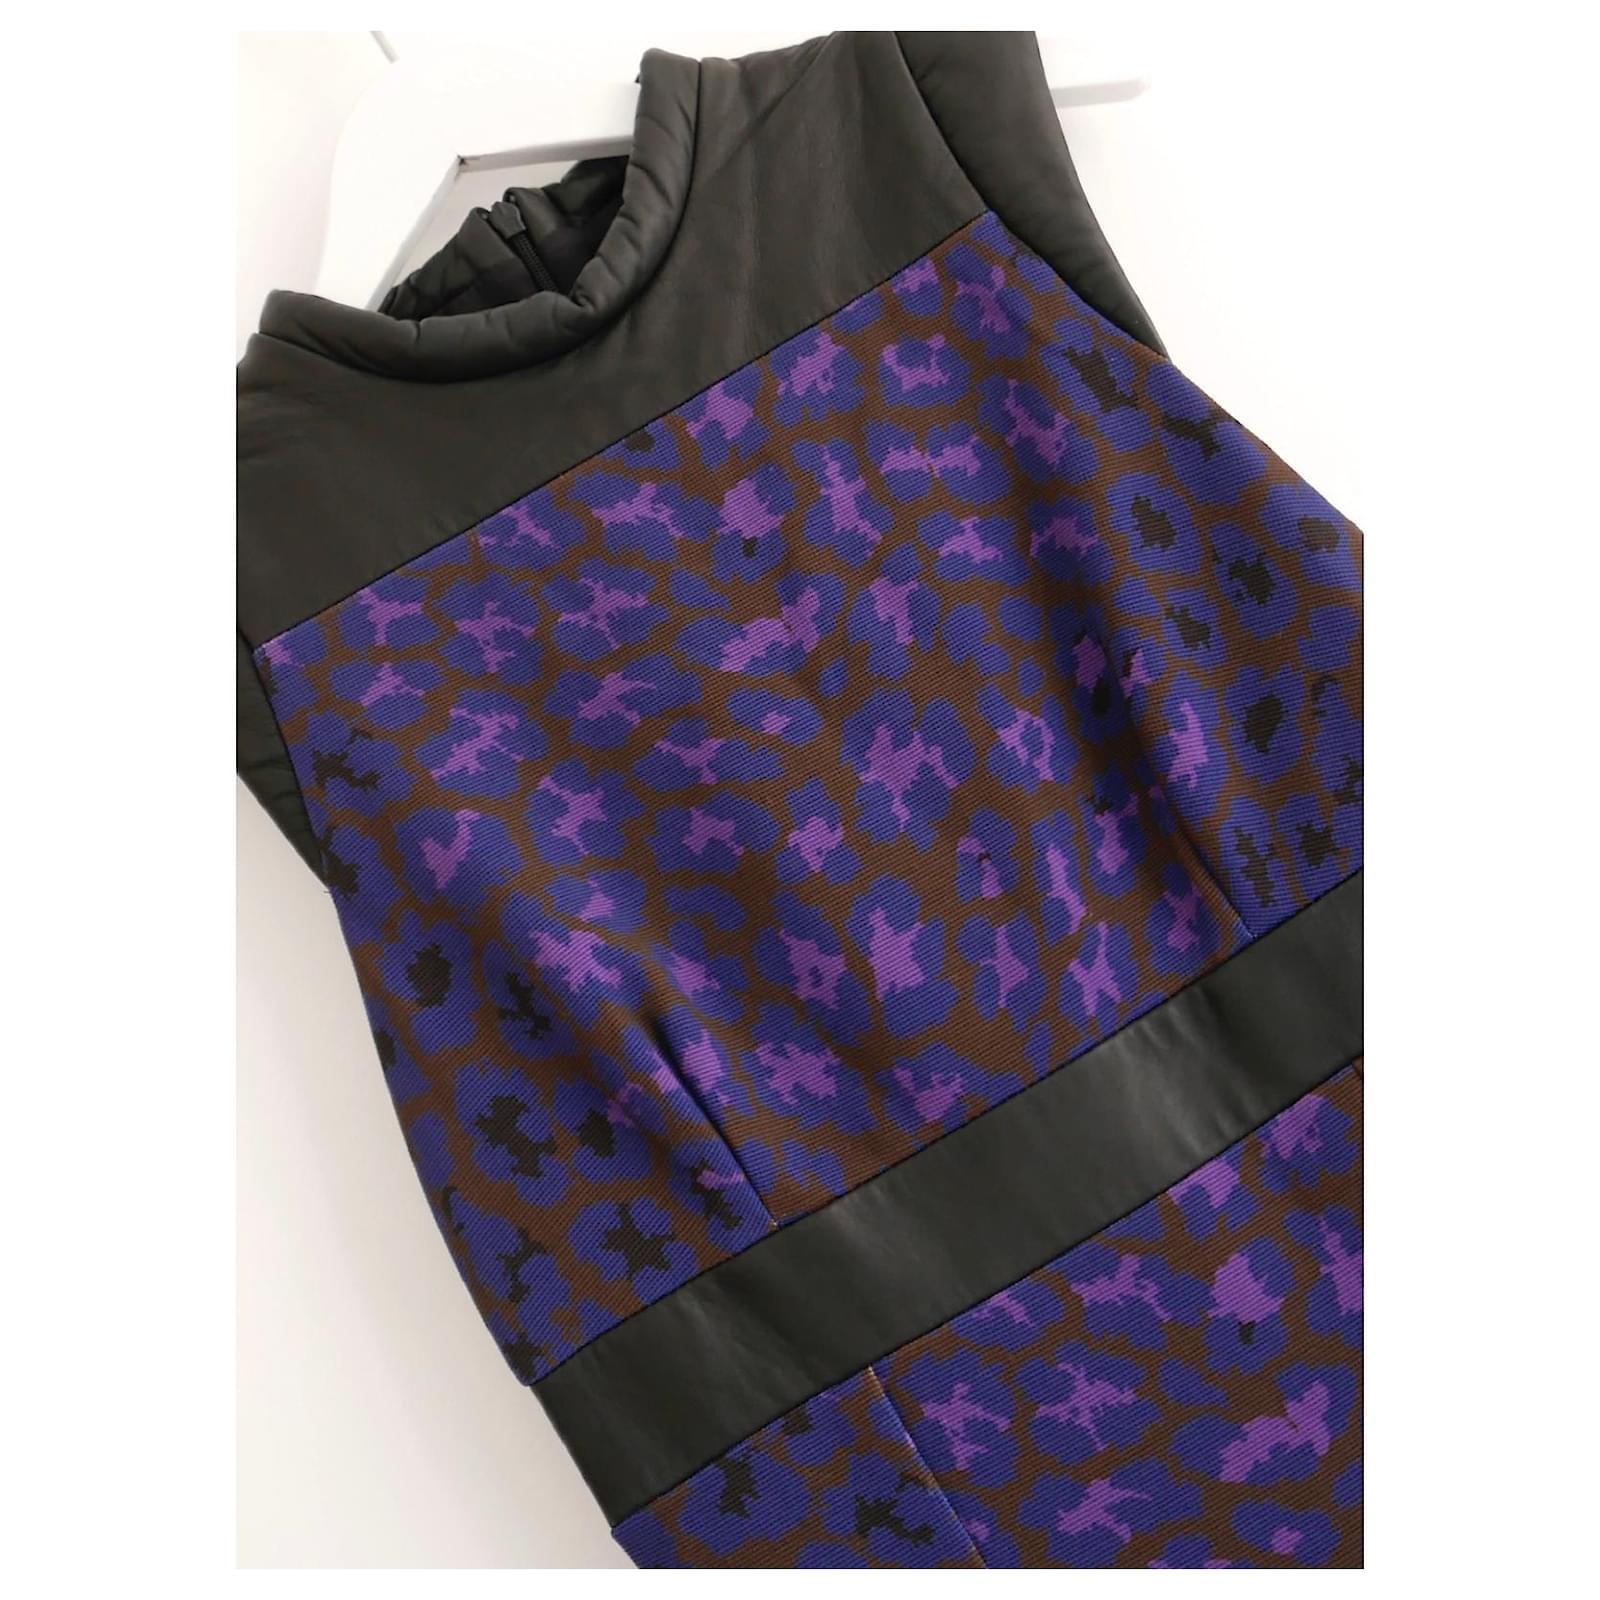 Super cool leopard brocade and quilted leather dress from Christopher Kane's Fall 2012 collection. Bought for £900 and unworn. Made from purple and blue textured thick polyester twill with soft leather puffer trims, it side slit pockets, raises